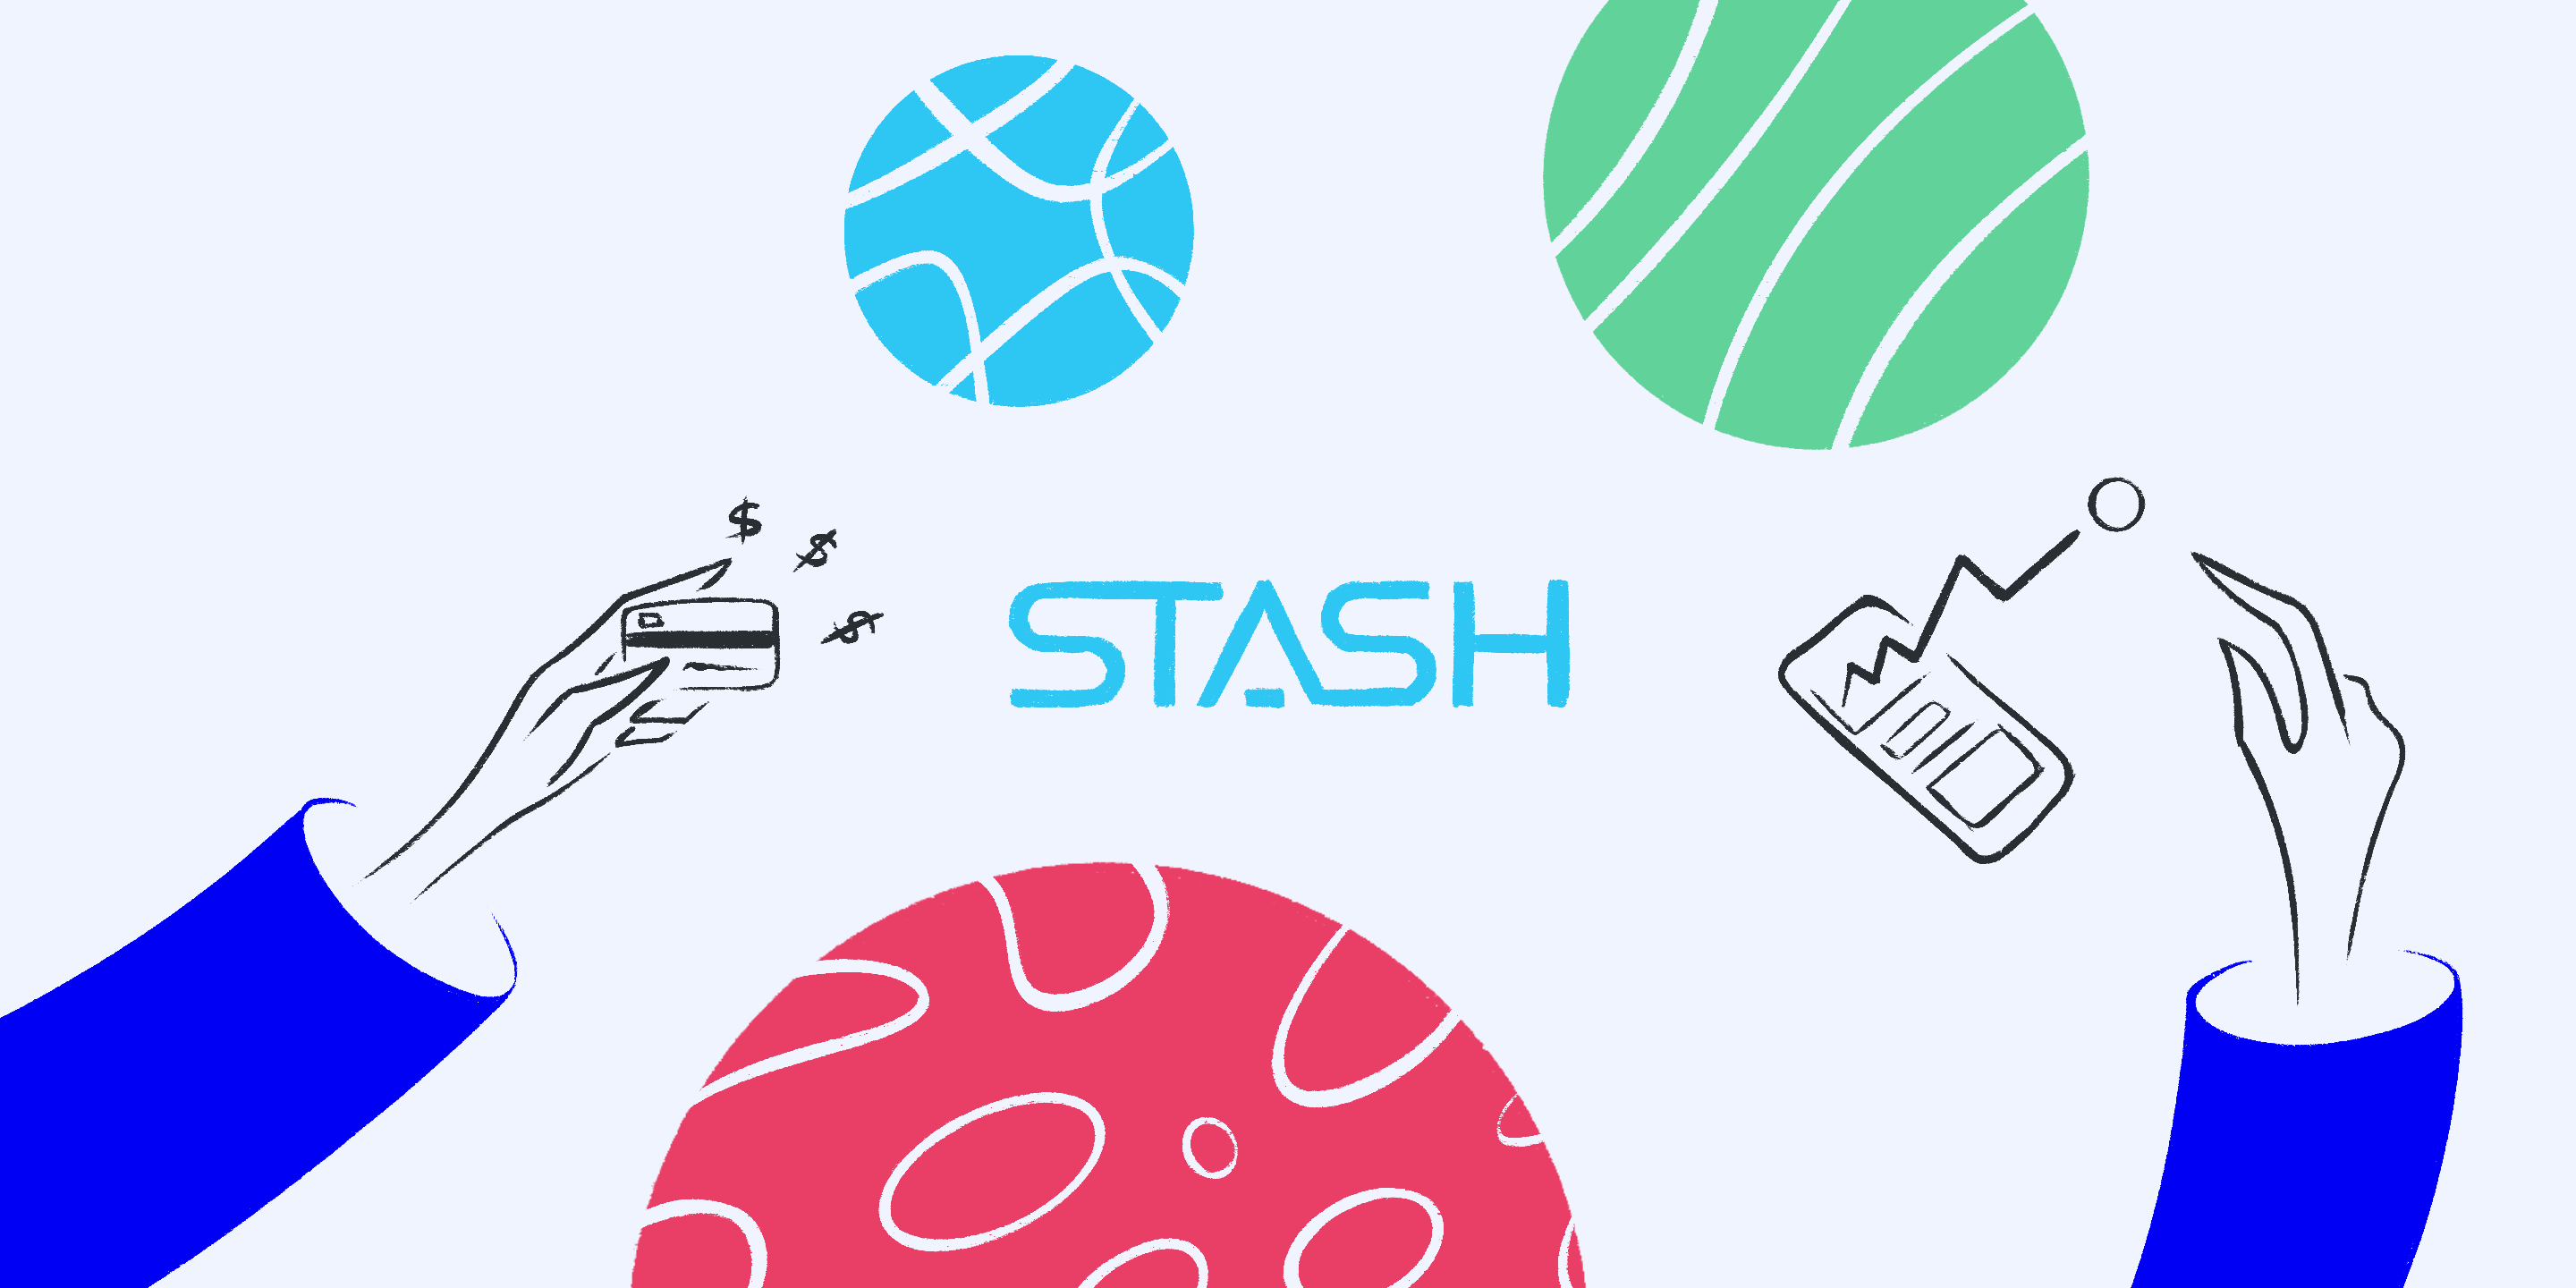 Stash Raises $40 Million In Funding And Plans For IPO